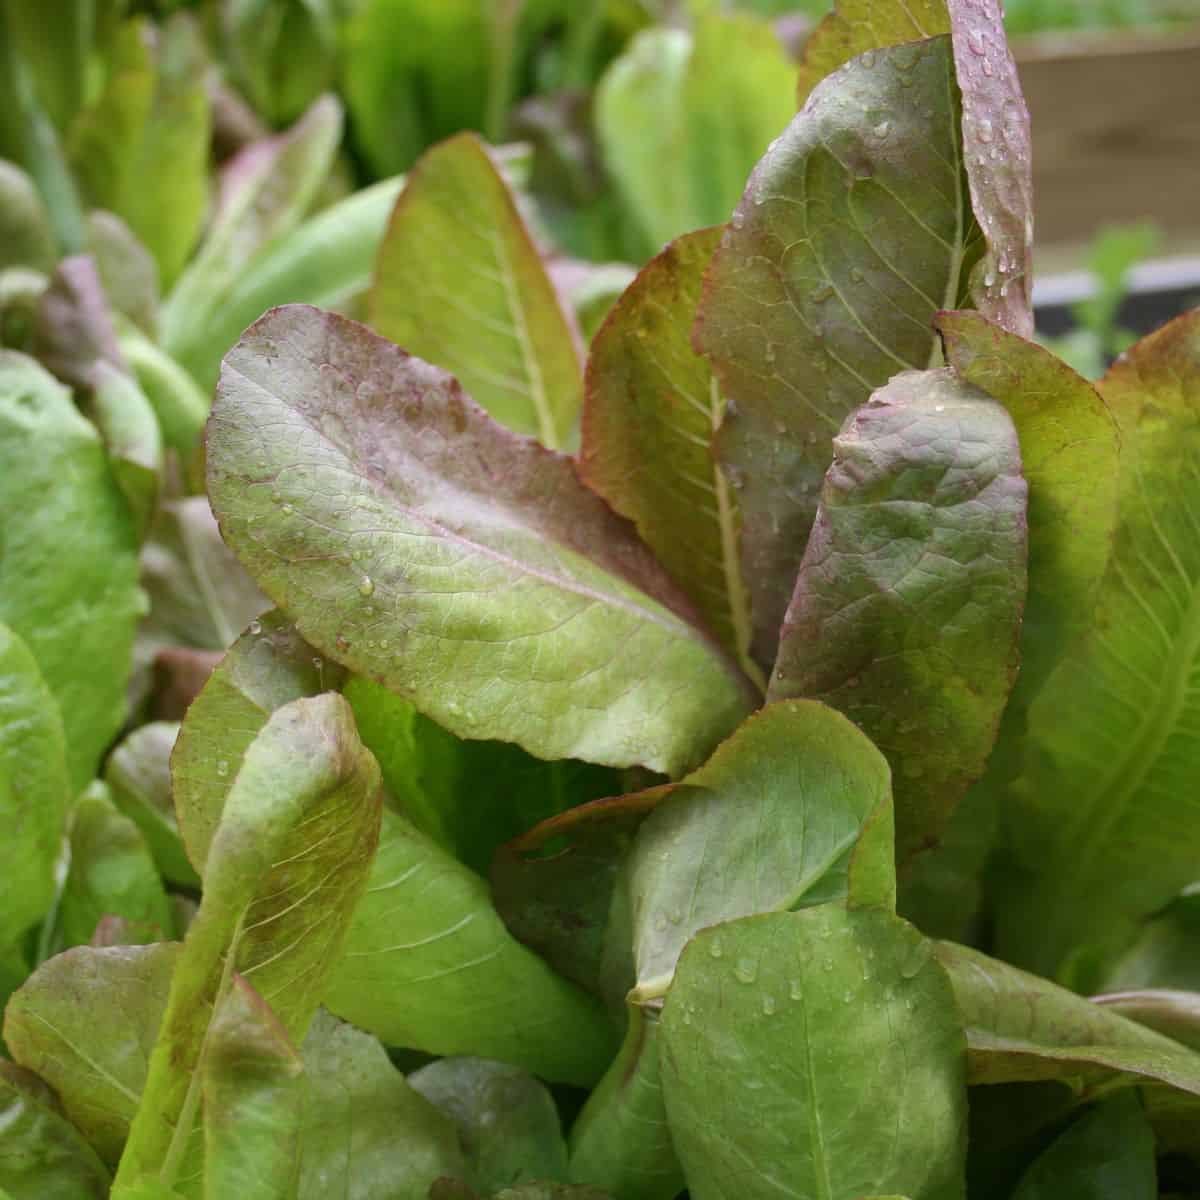 numerous types of lettuce in the garden, closeup of lettuce leaves